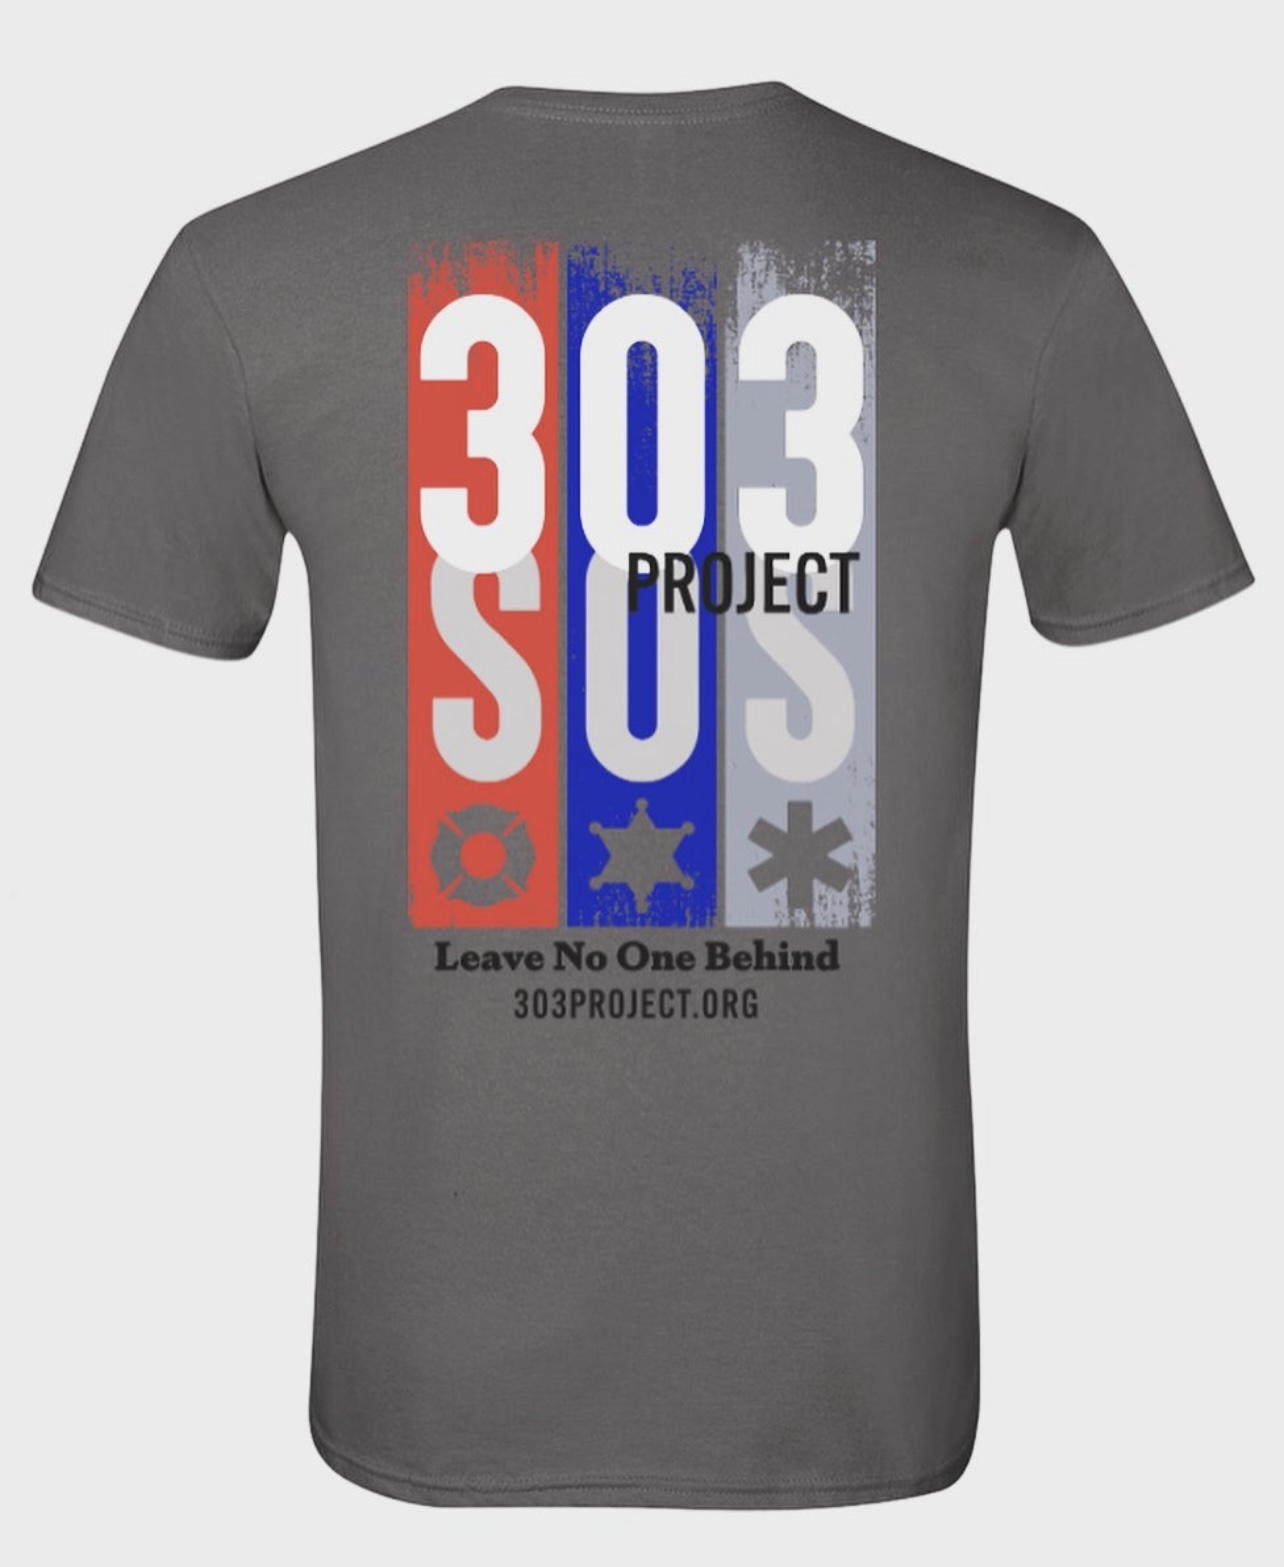 The 303 Project SOS Tee Shirt